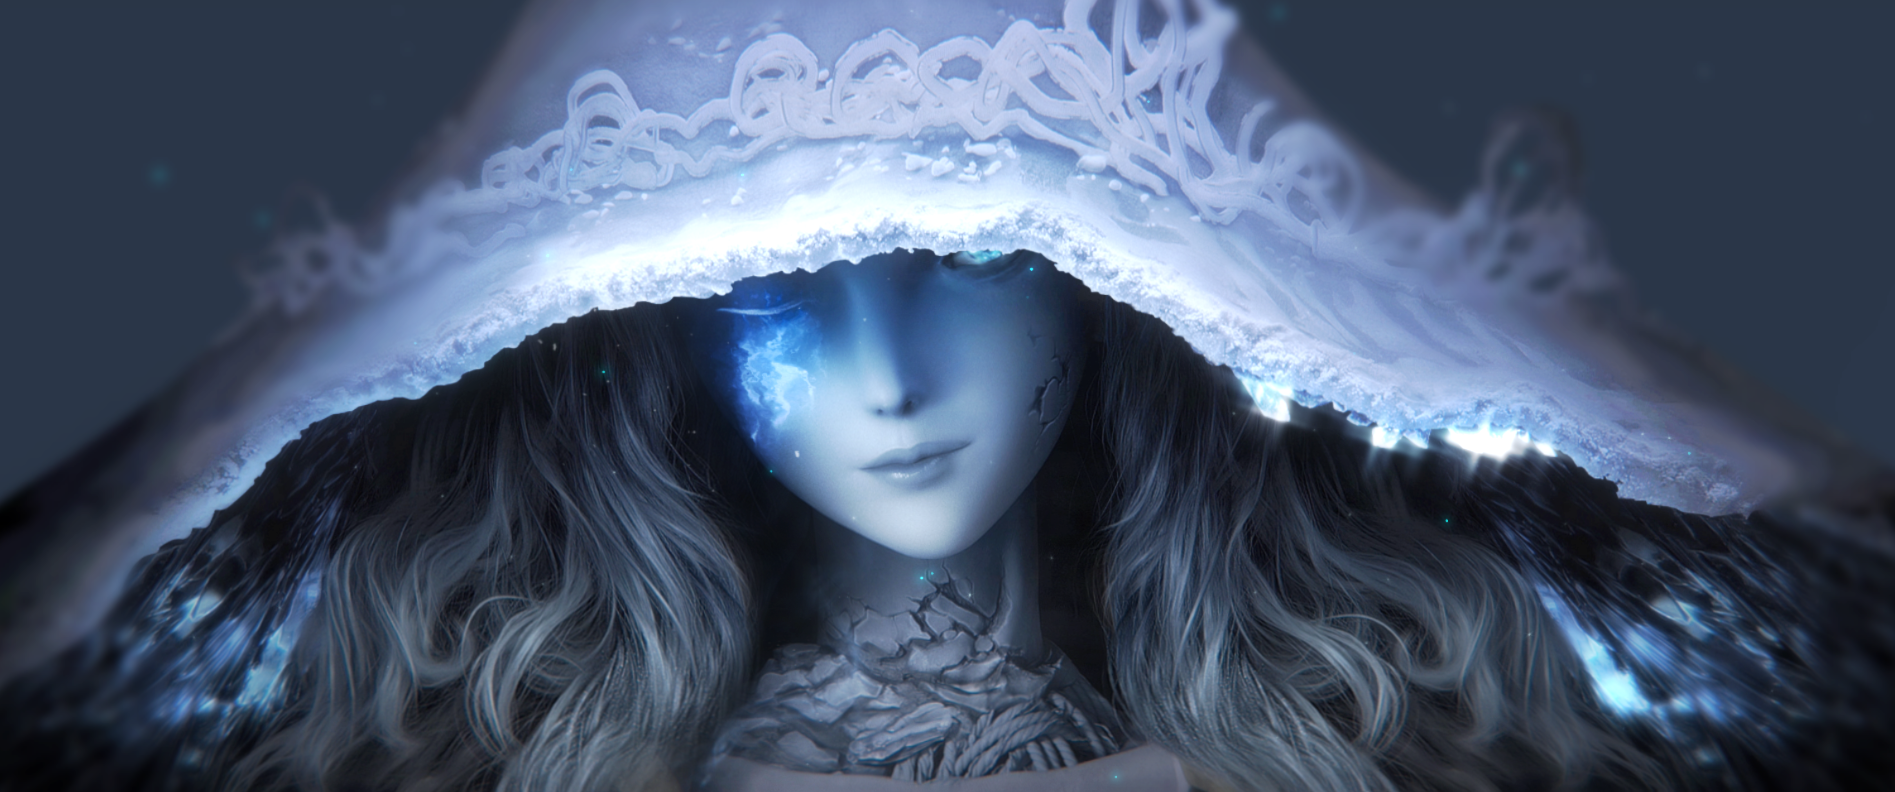 The Snow Witch Elden Ring live wallpaper [DOWNLOAD FREE]